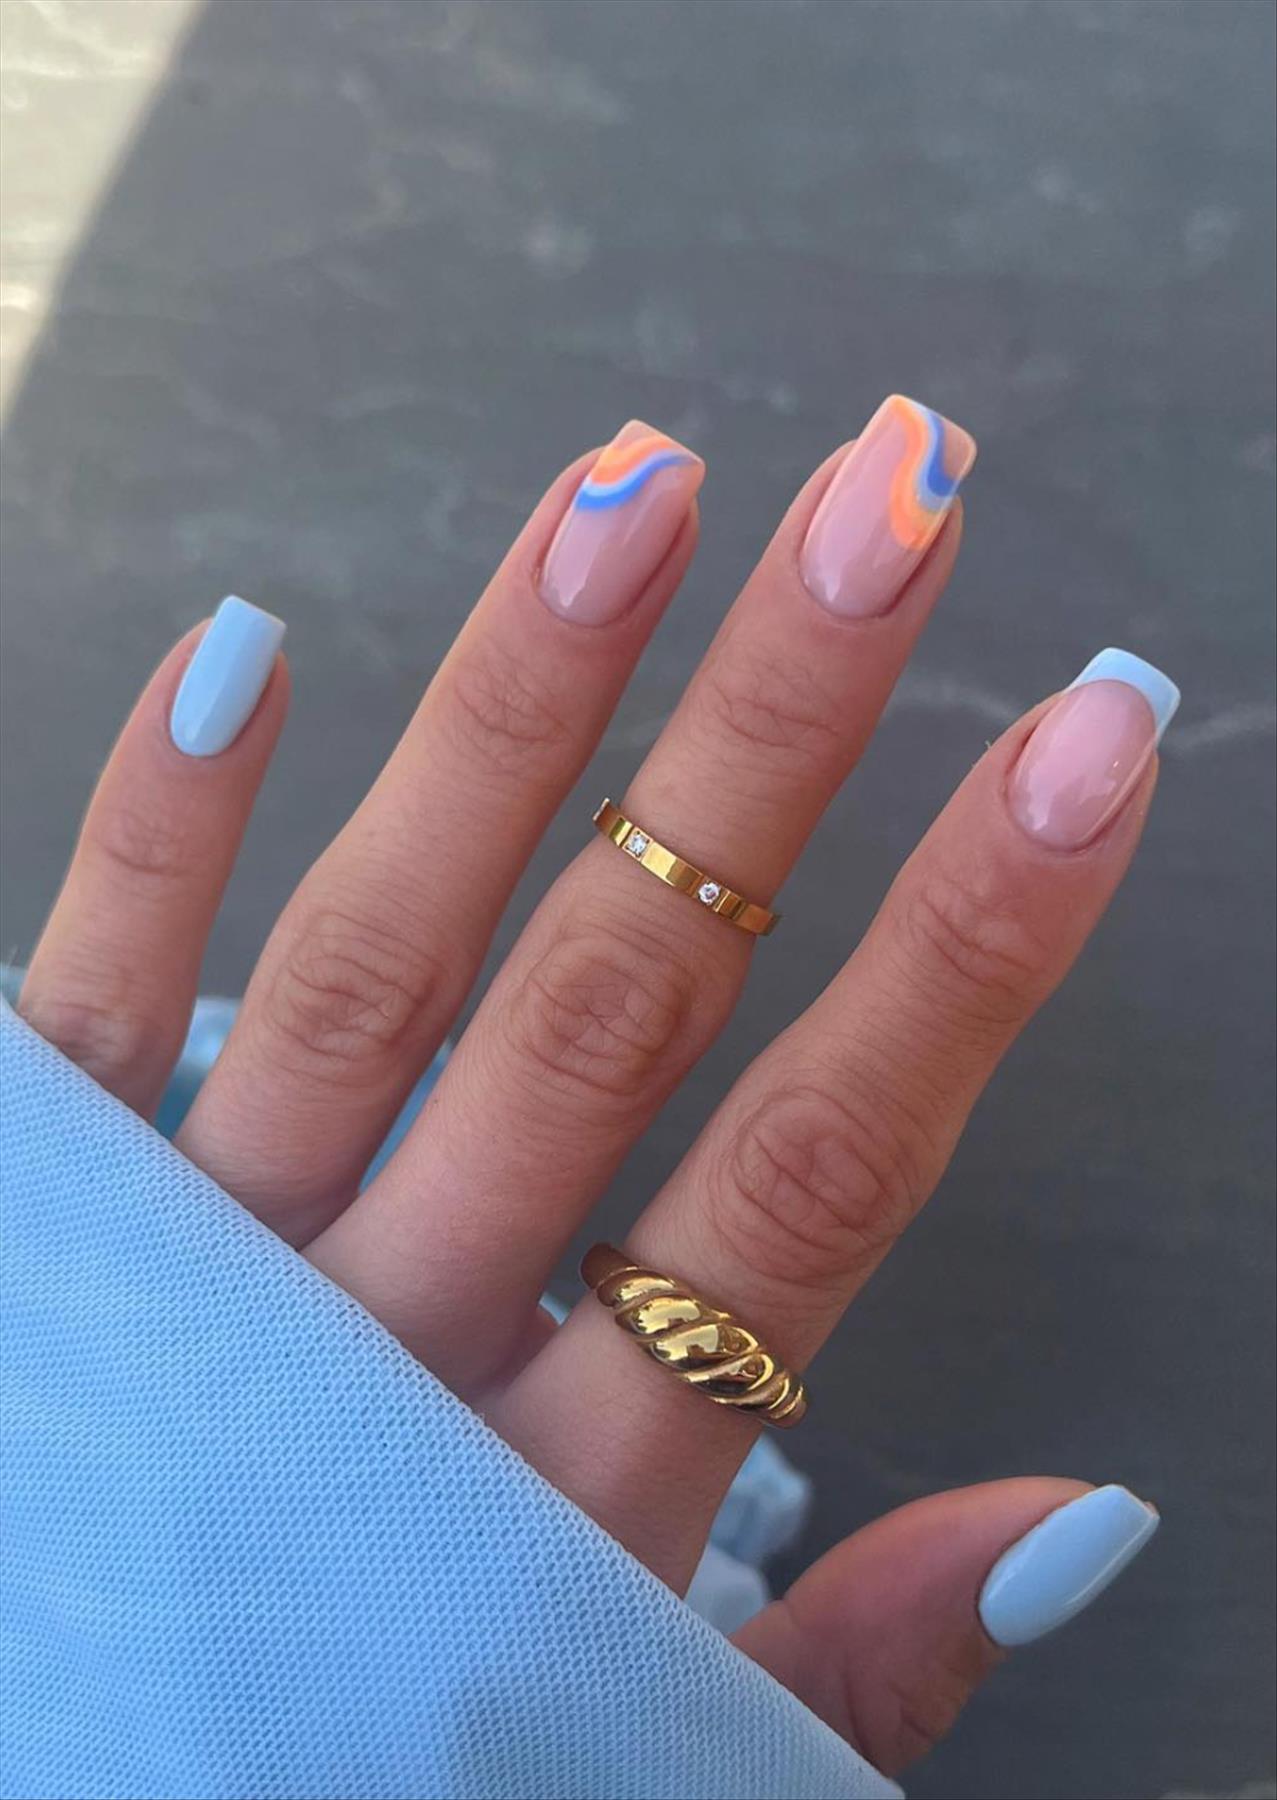 Best & Simple short coffin nails ideas for Summer manicures inspo